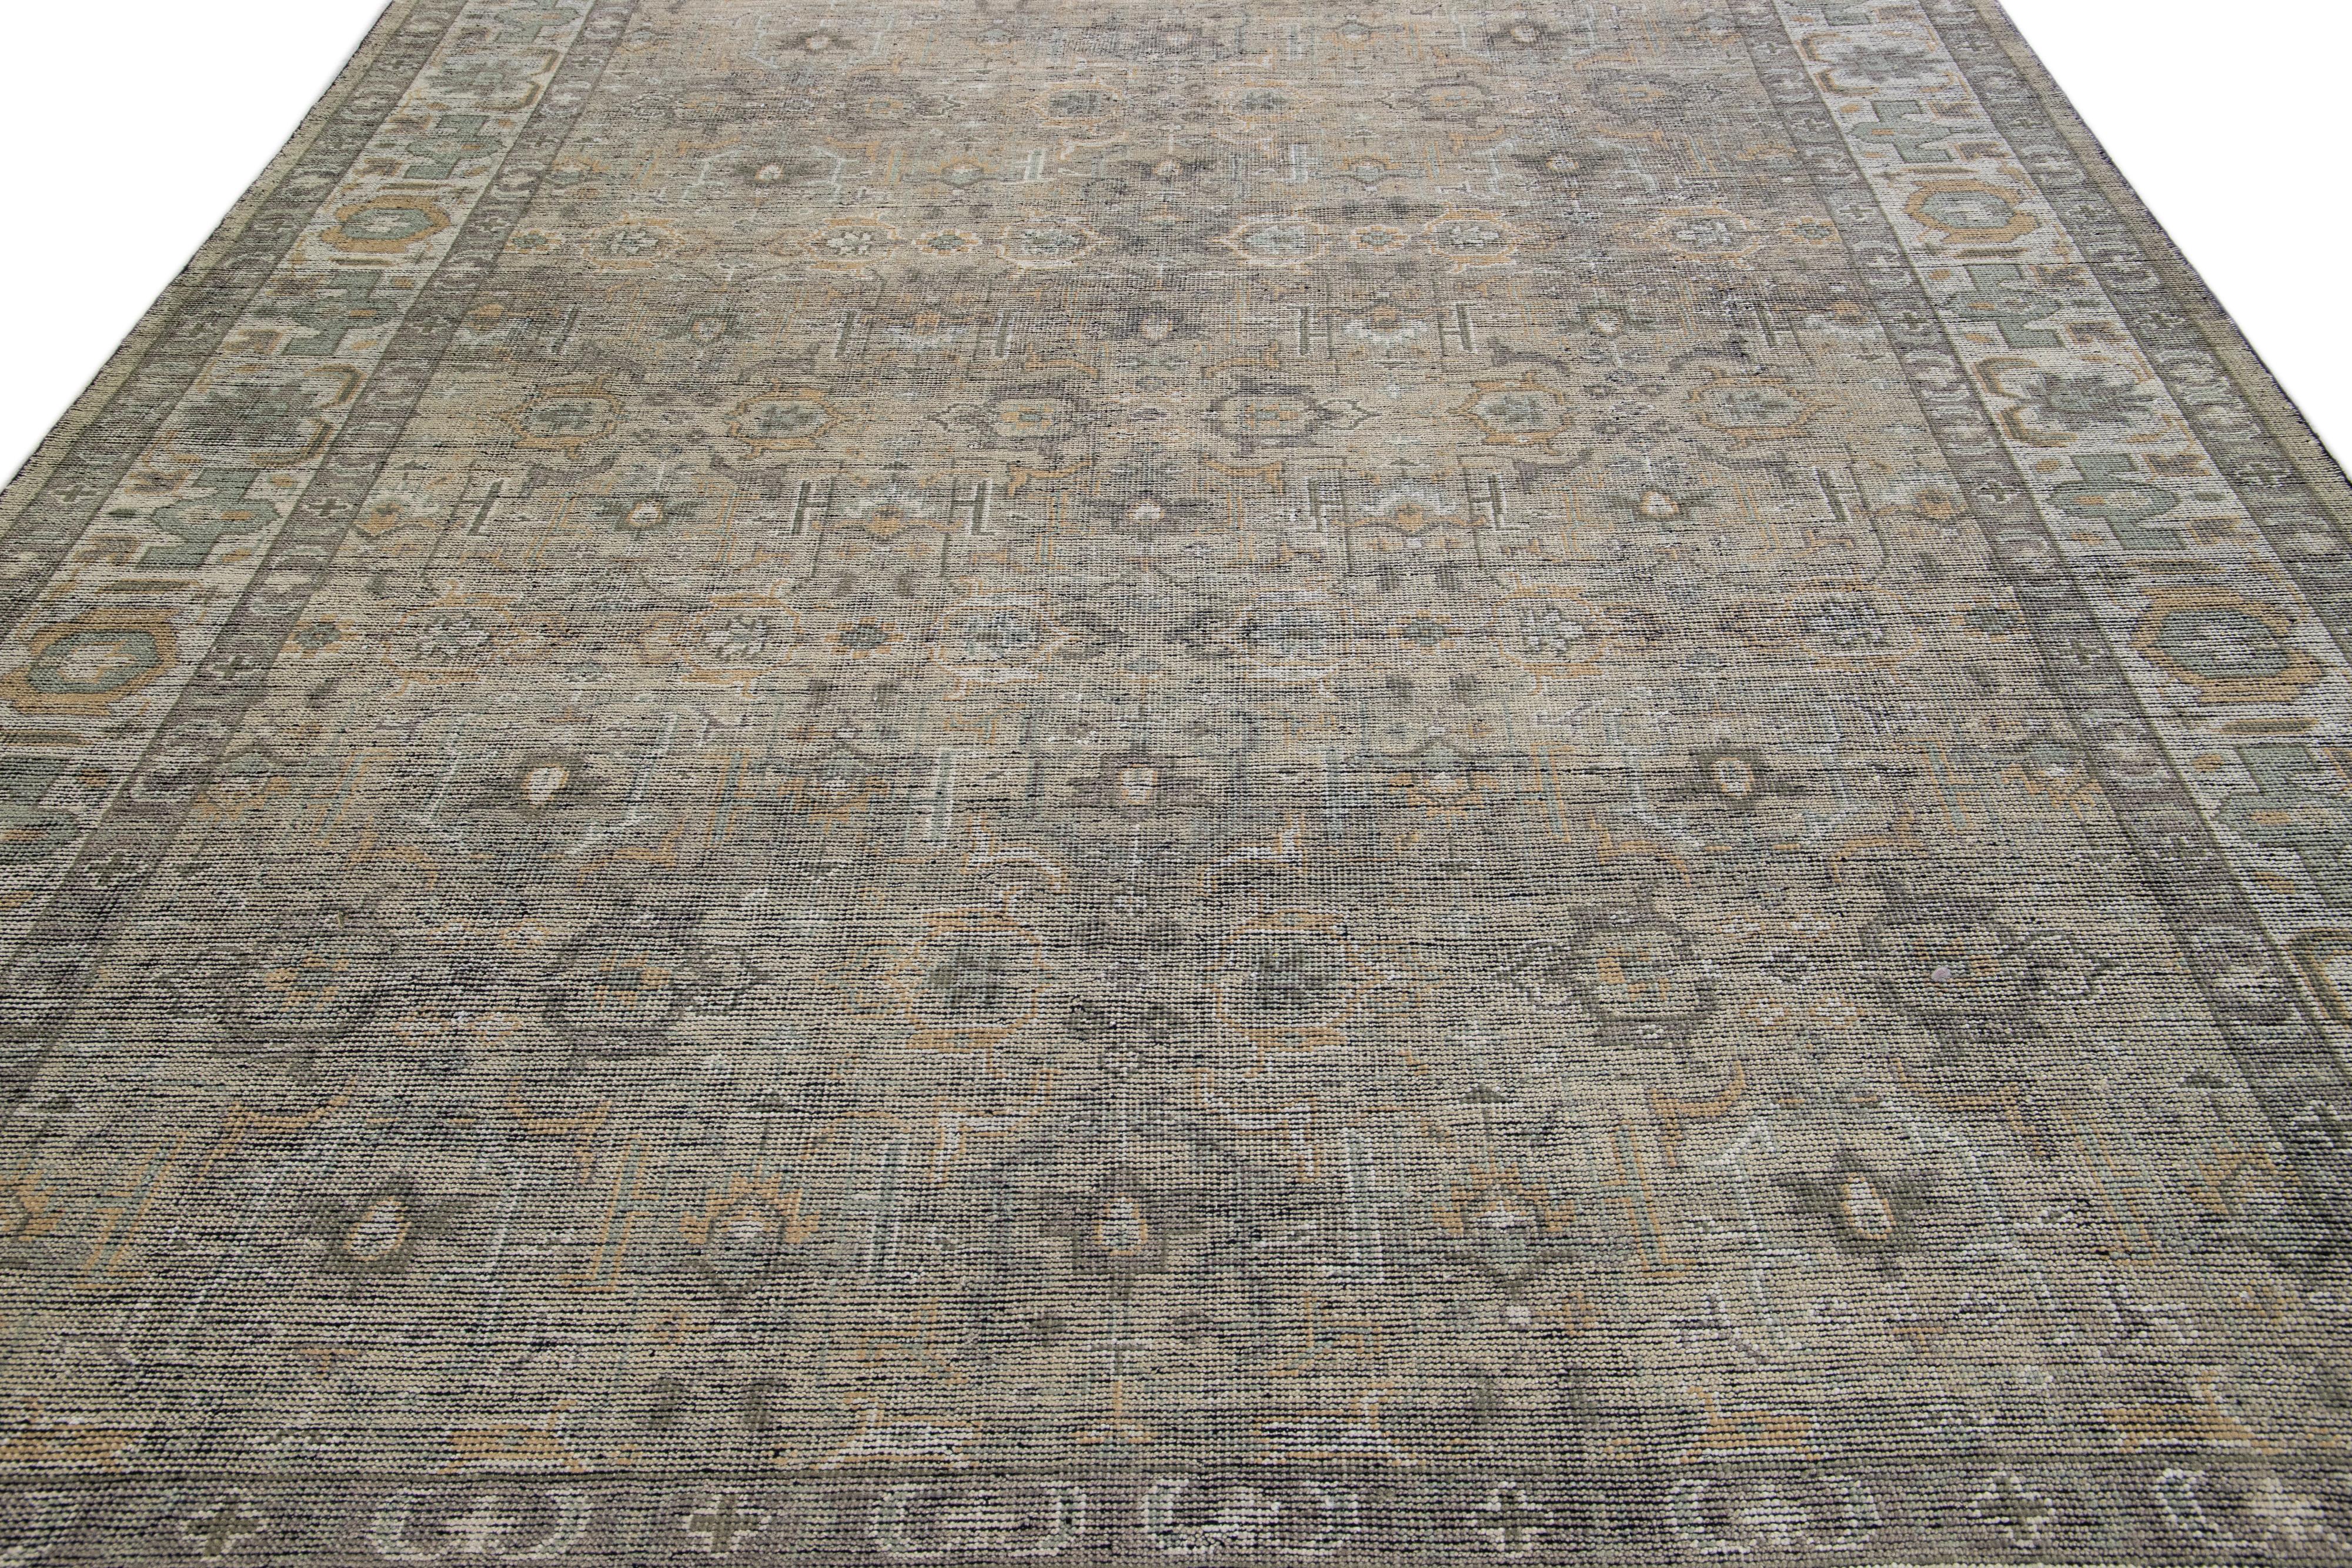 Beautiful contemporary Oushak rug, hand knotted wool with a tan field, ivory and green accents in an all-over Classic motif, circa 2019.
This rug measures 9' 2